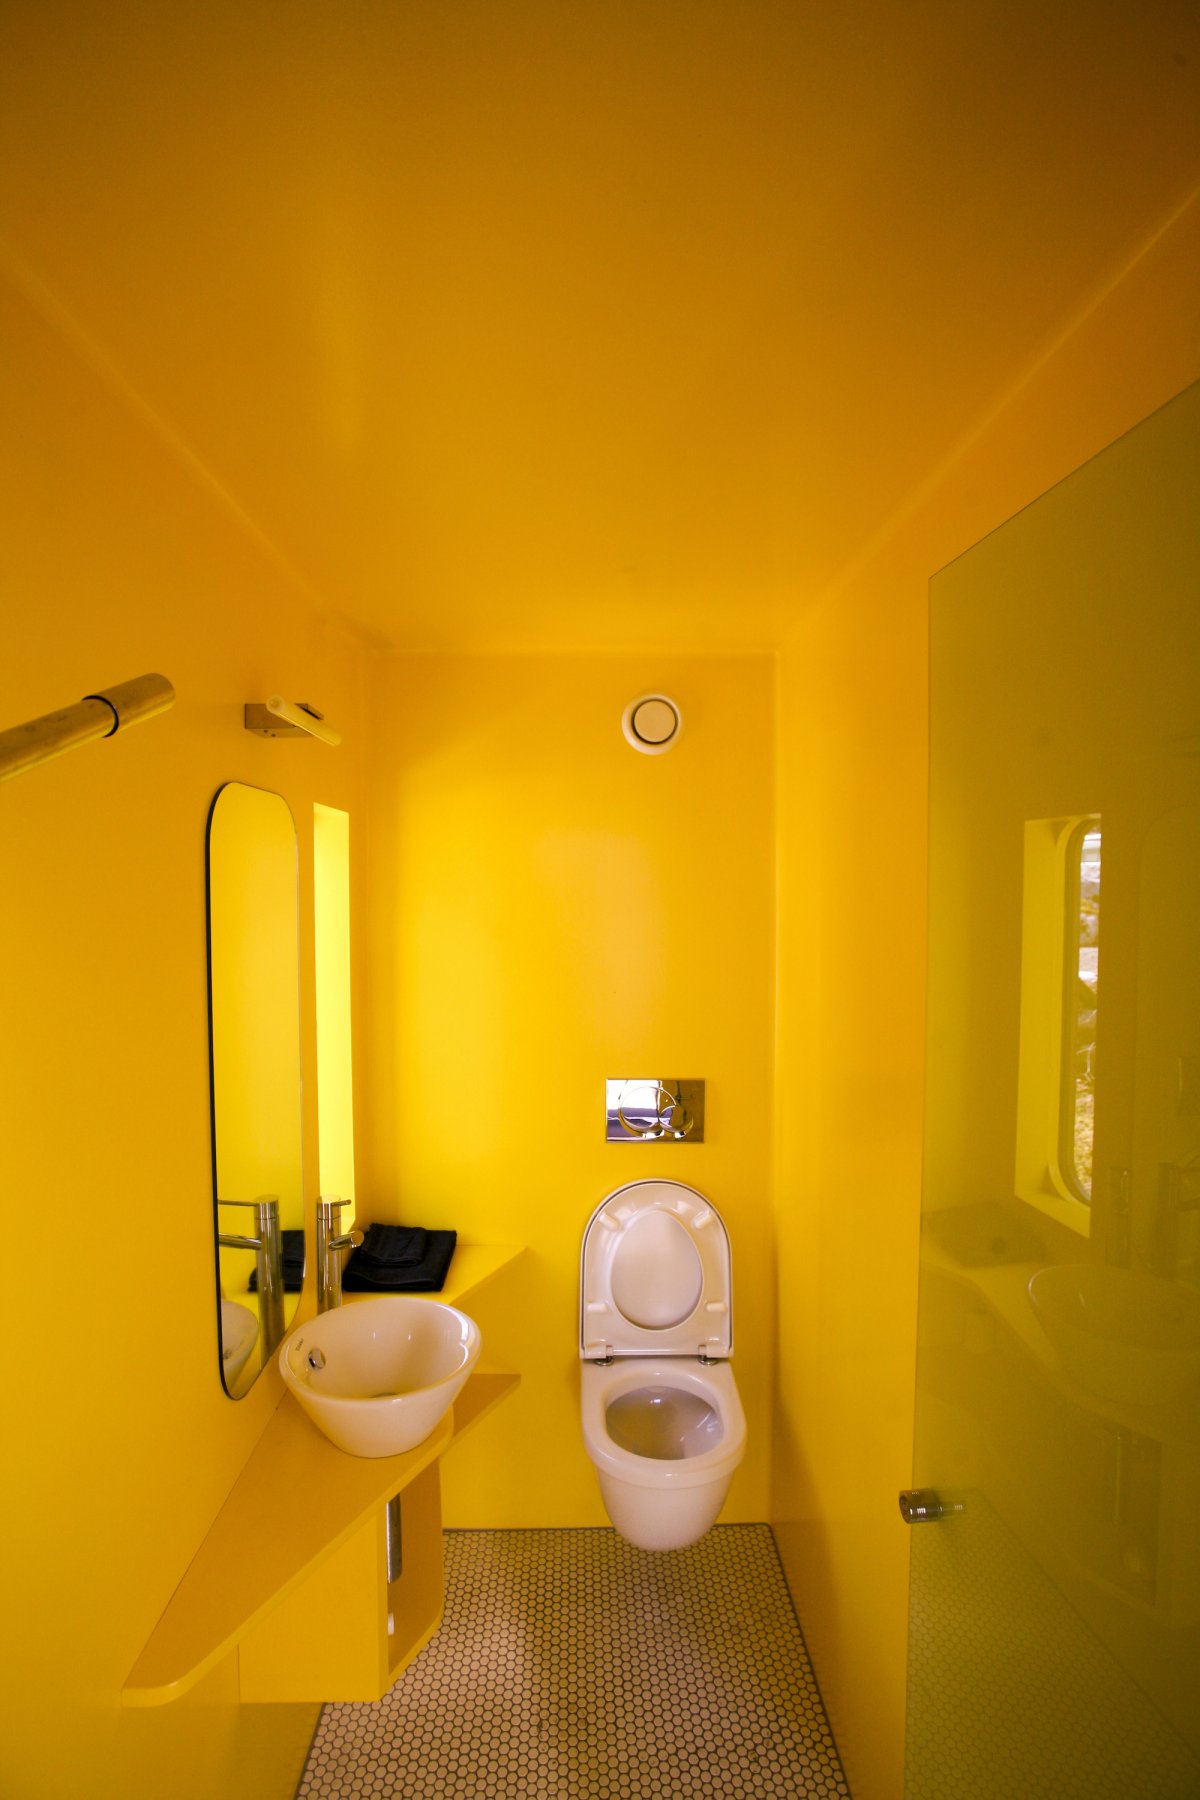 the-pods-bathrooms-are-also-brighter-than-the-drab-ones-in-the-film